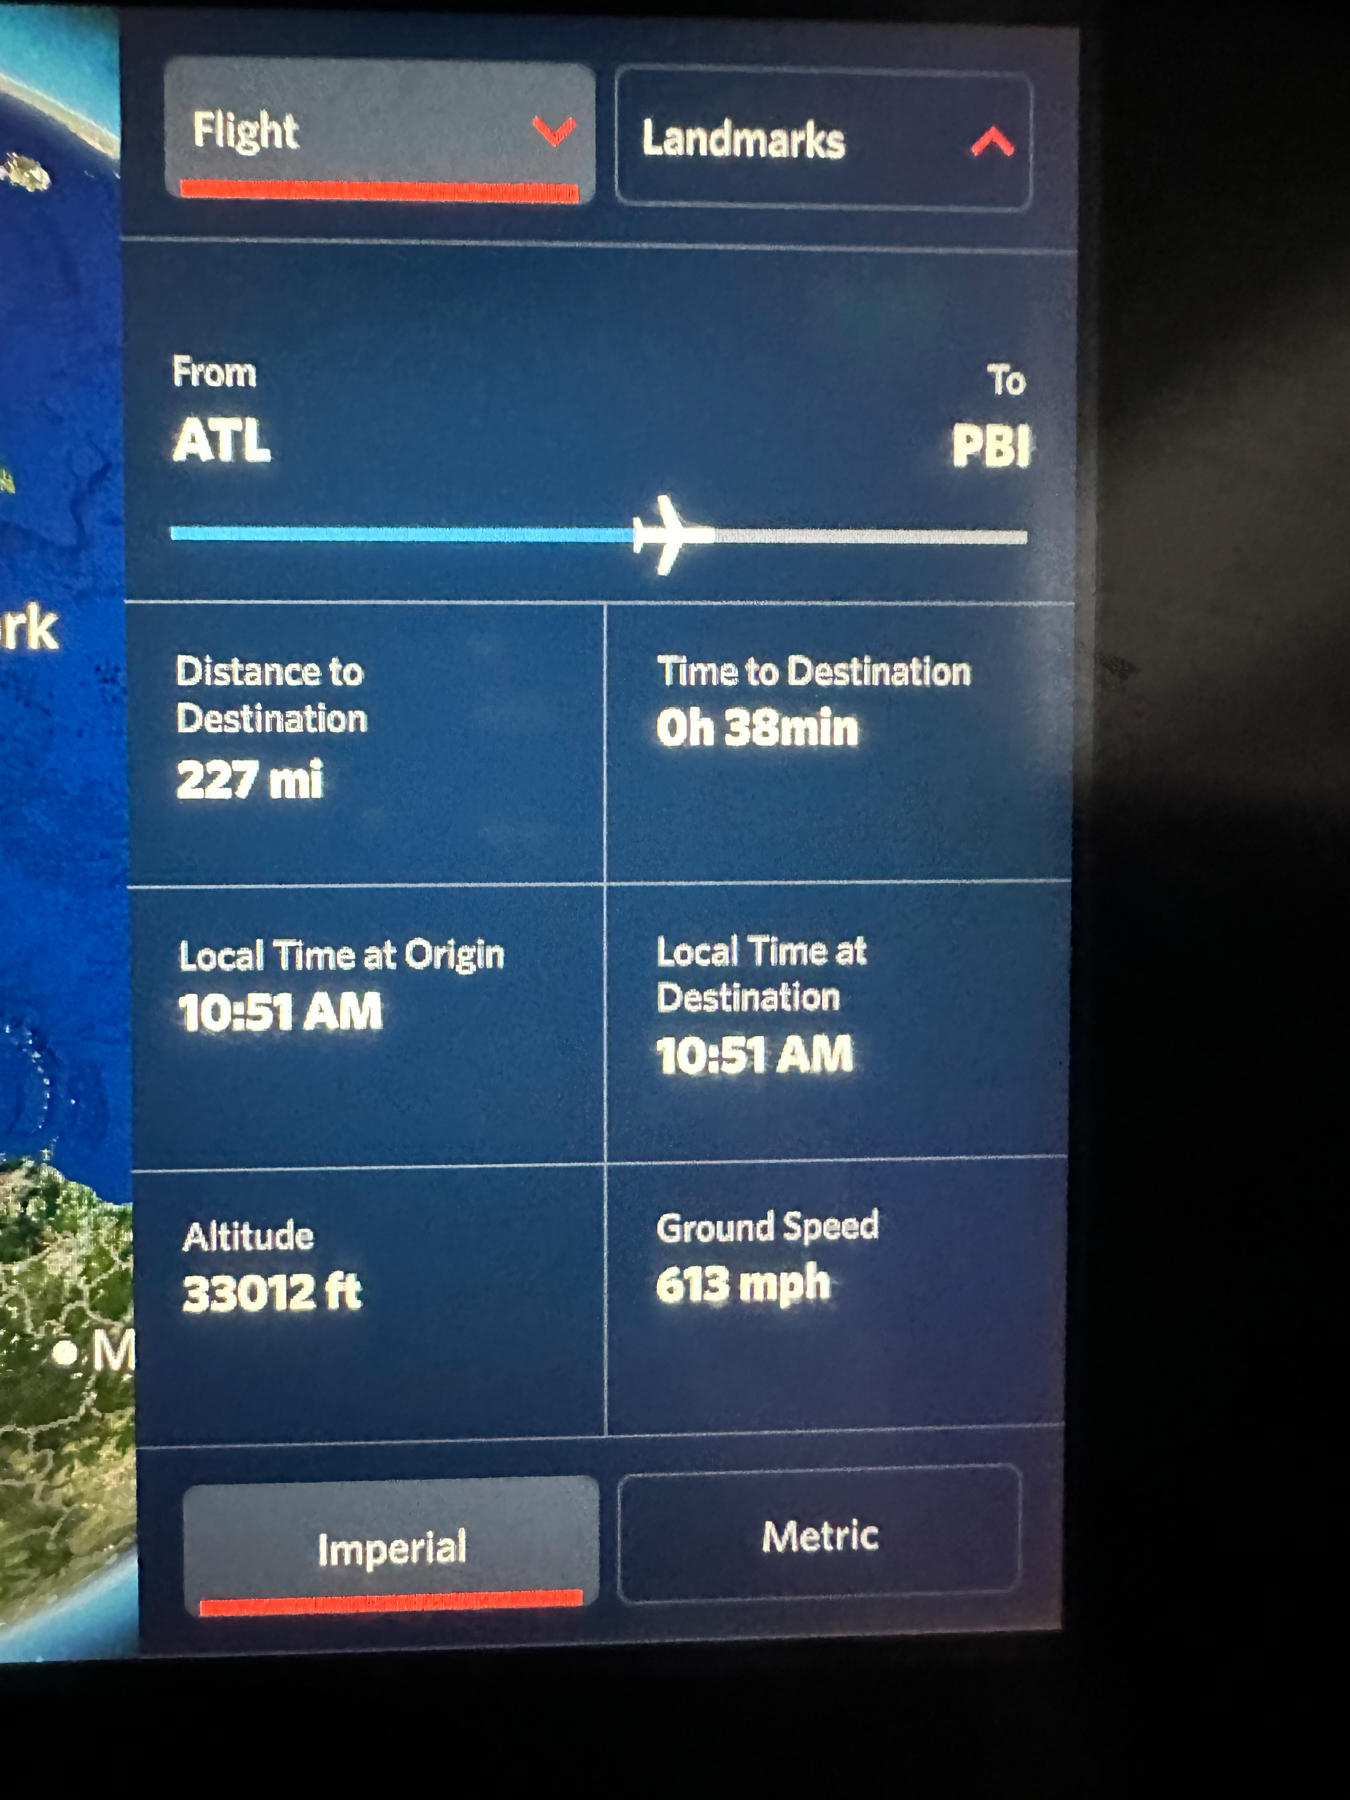 In-flight entertainment screen displaying flight information: Origin ATL, Destination PBI, 227 miles and 38 minutes to destination, local time at both origin and destination 10:51 AM, altitude 33,012 feet, ground speed 613 mph